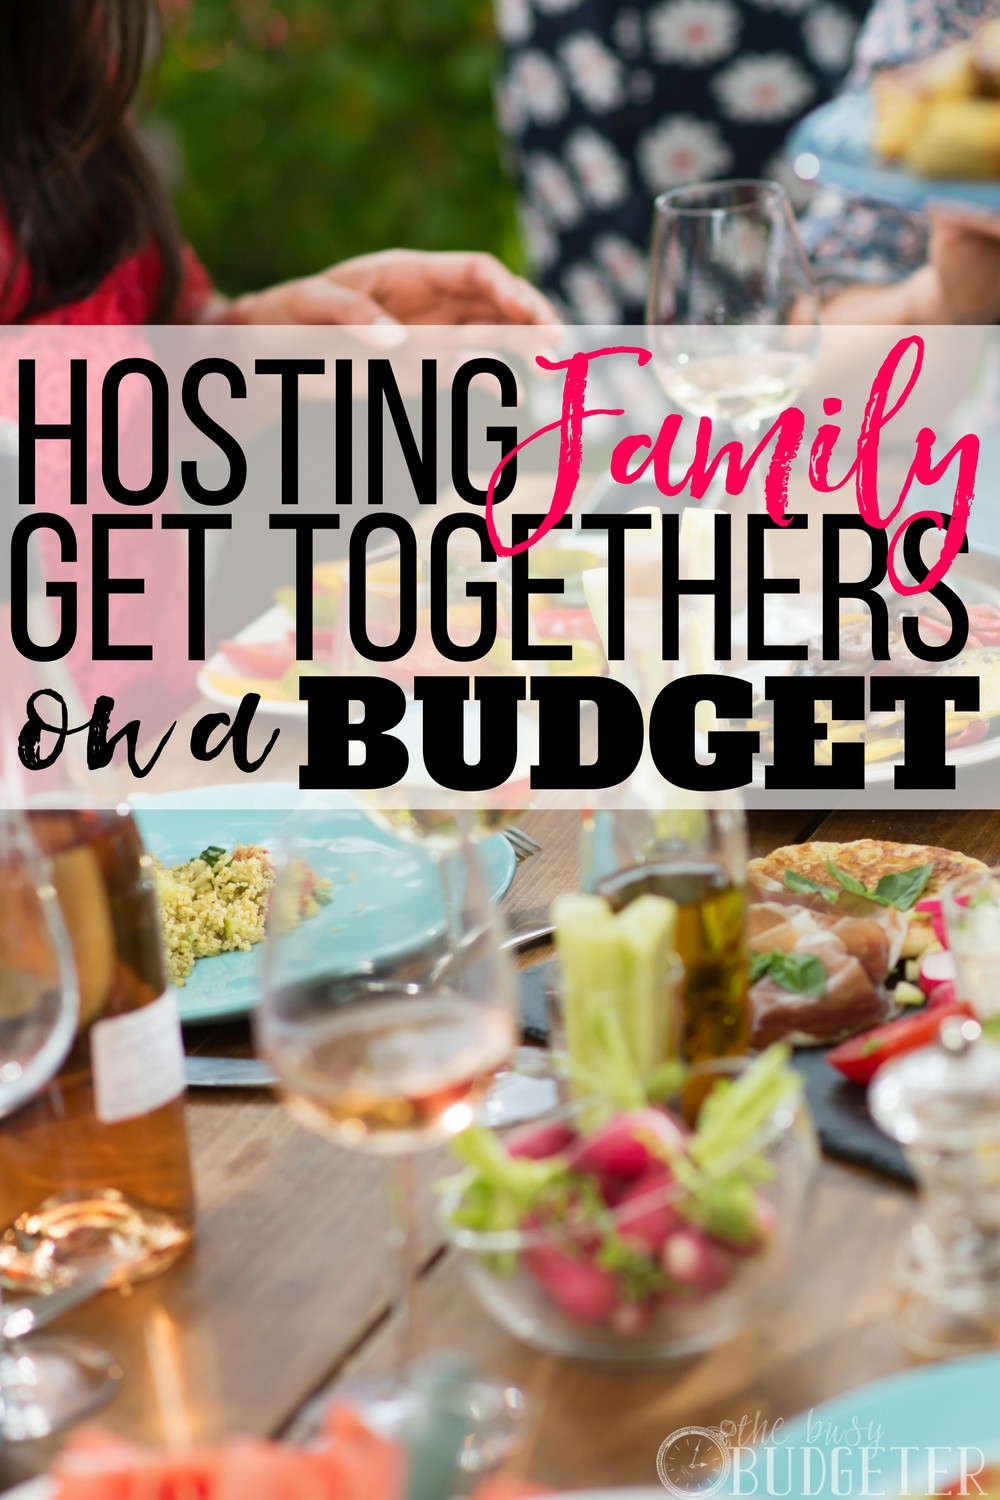 Company Holiday Party Ideas On A Budget
 Hosting Family Get To hers on a Bud Fun Ideas for